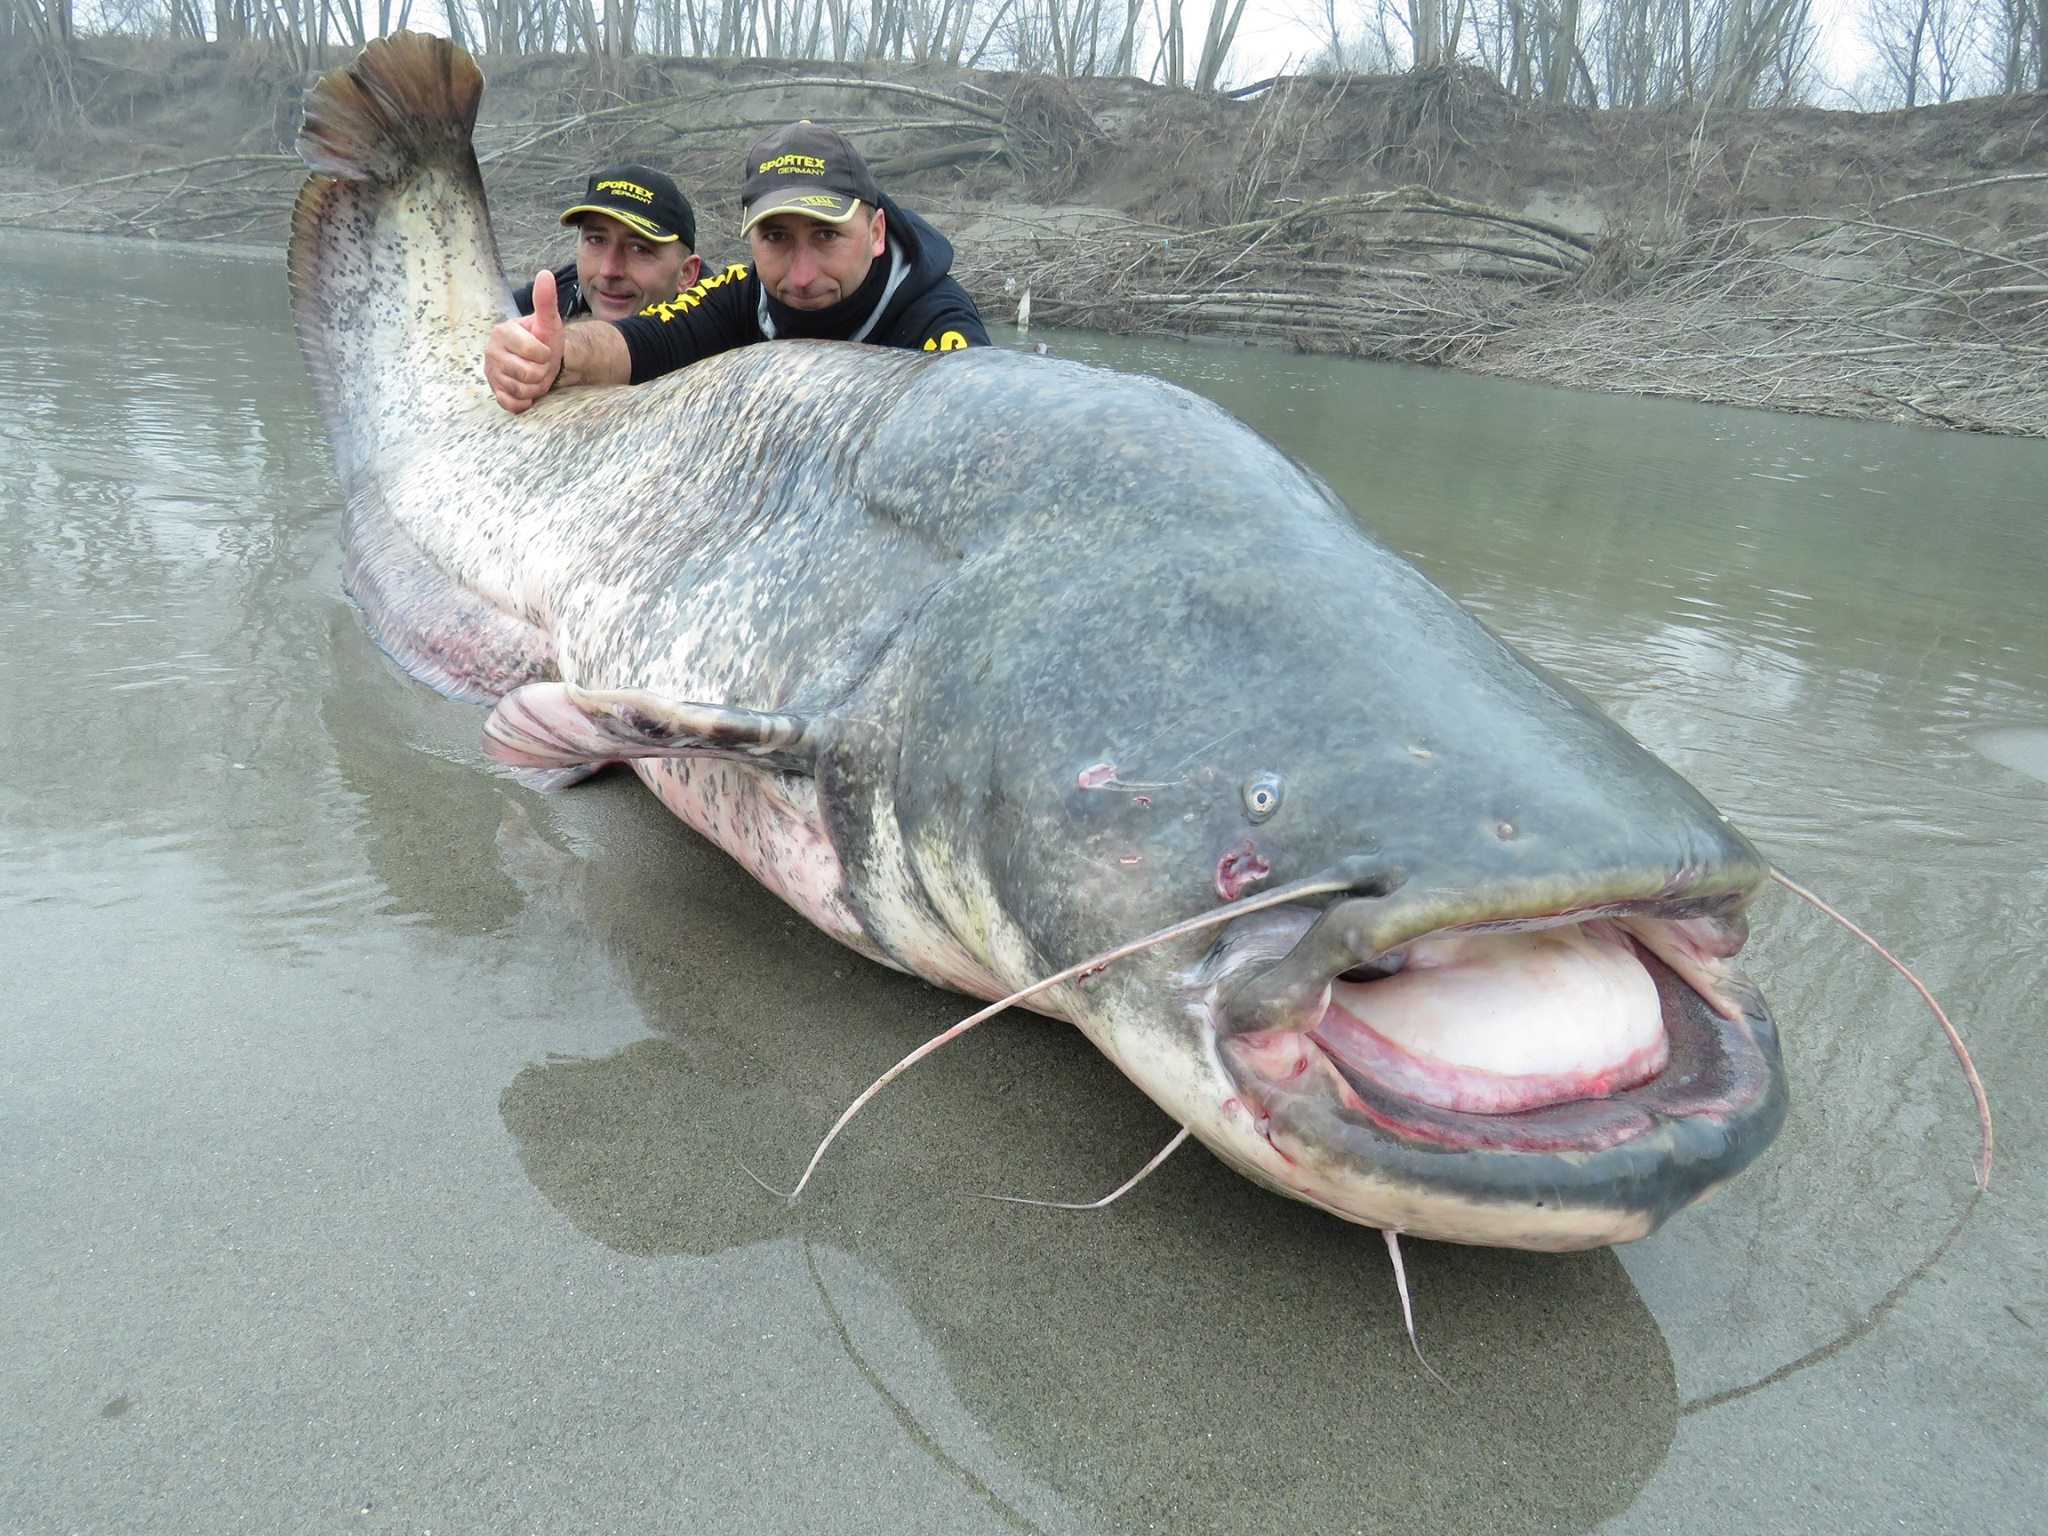 Holy carp! Just look at how big this catfish is!! Img from NTD India